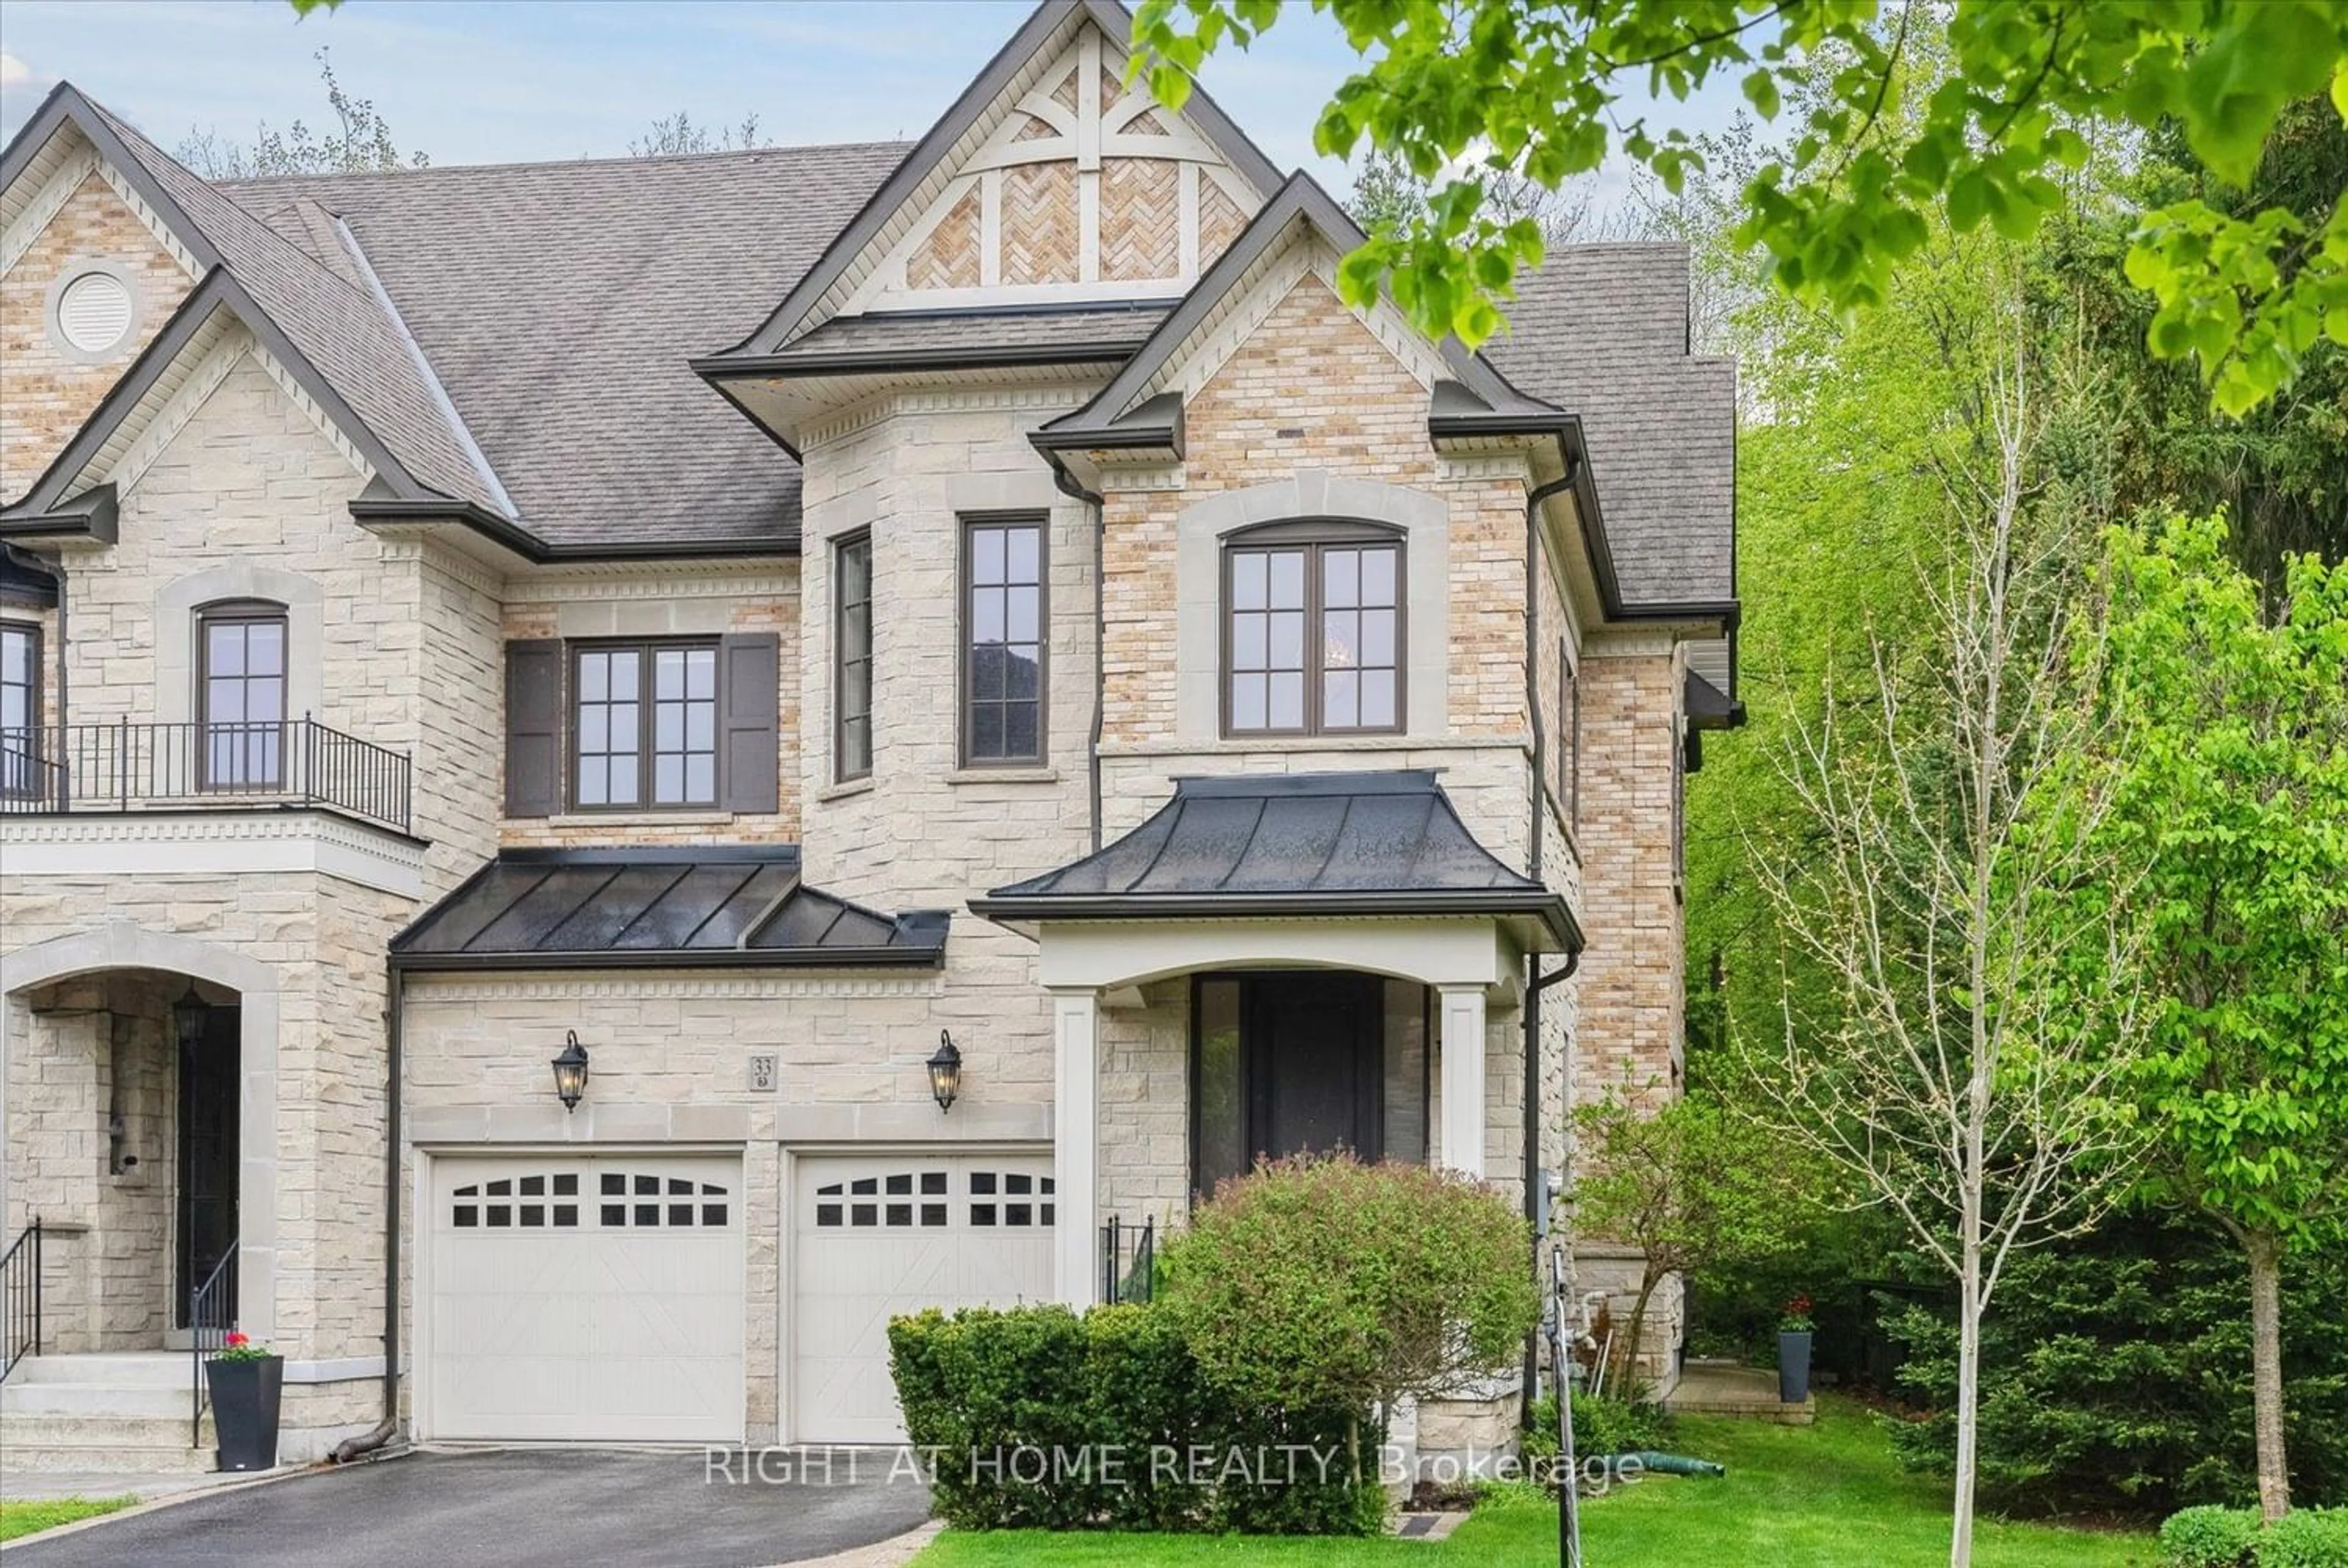 Home with brick exterior material for 33 Jenny Thompson Crt, Richmond Hill Ontario L4S 0E7